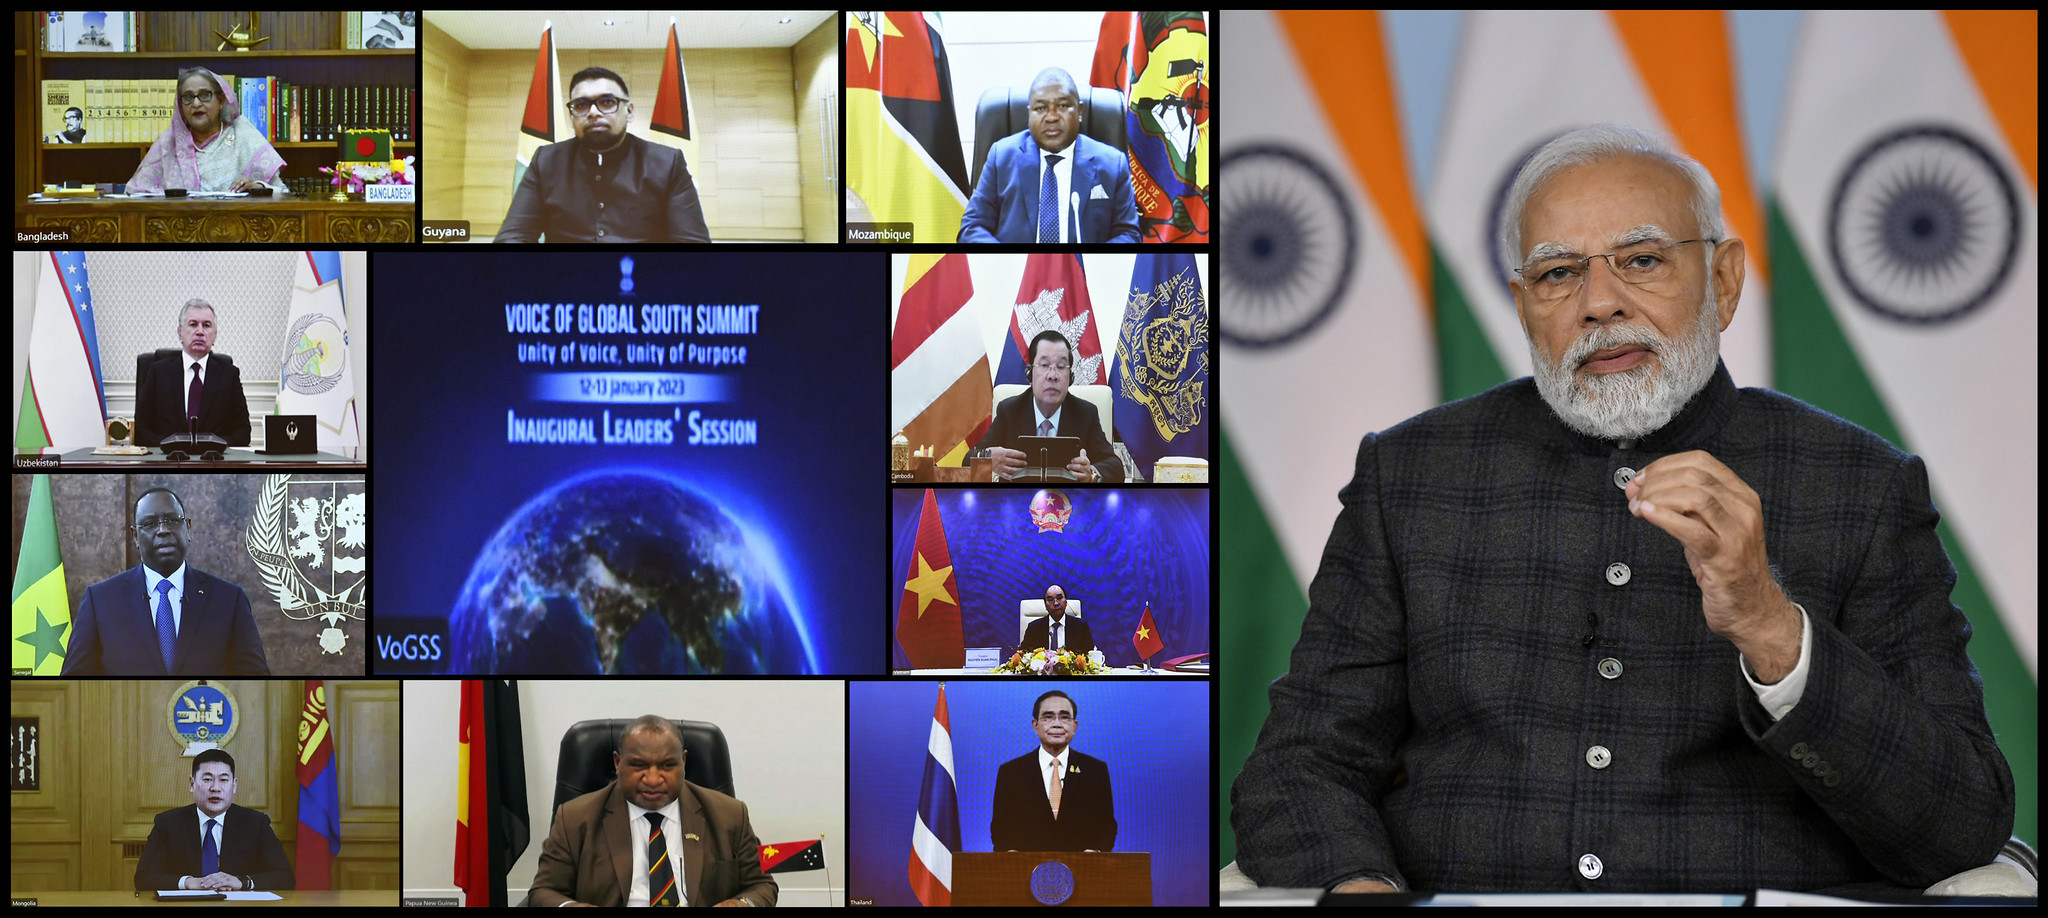 India’s Prime Minister Shri Narendra Modi leading the inaugural session of the virtual Voice of Global South Summit on 12 and 13 January 2023. © MEA Photogallery / Flickr.